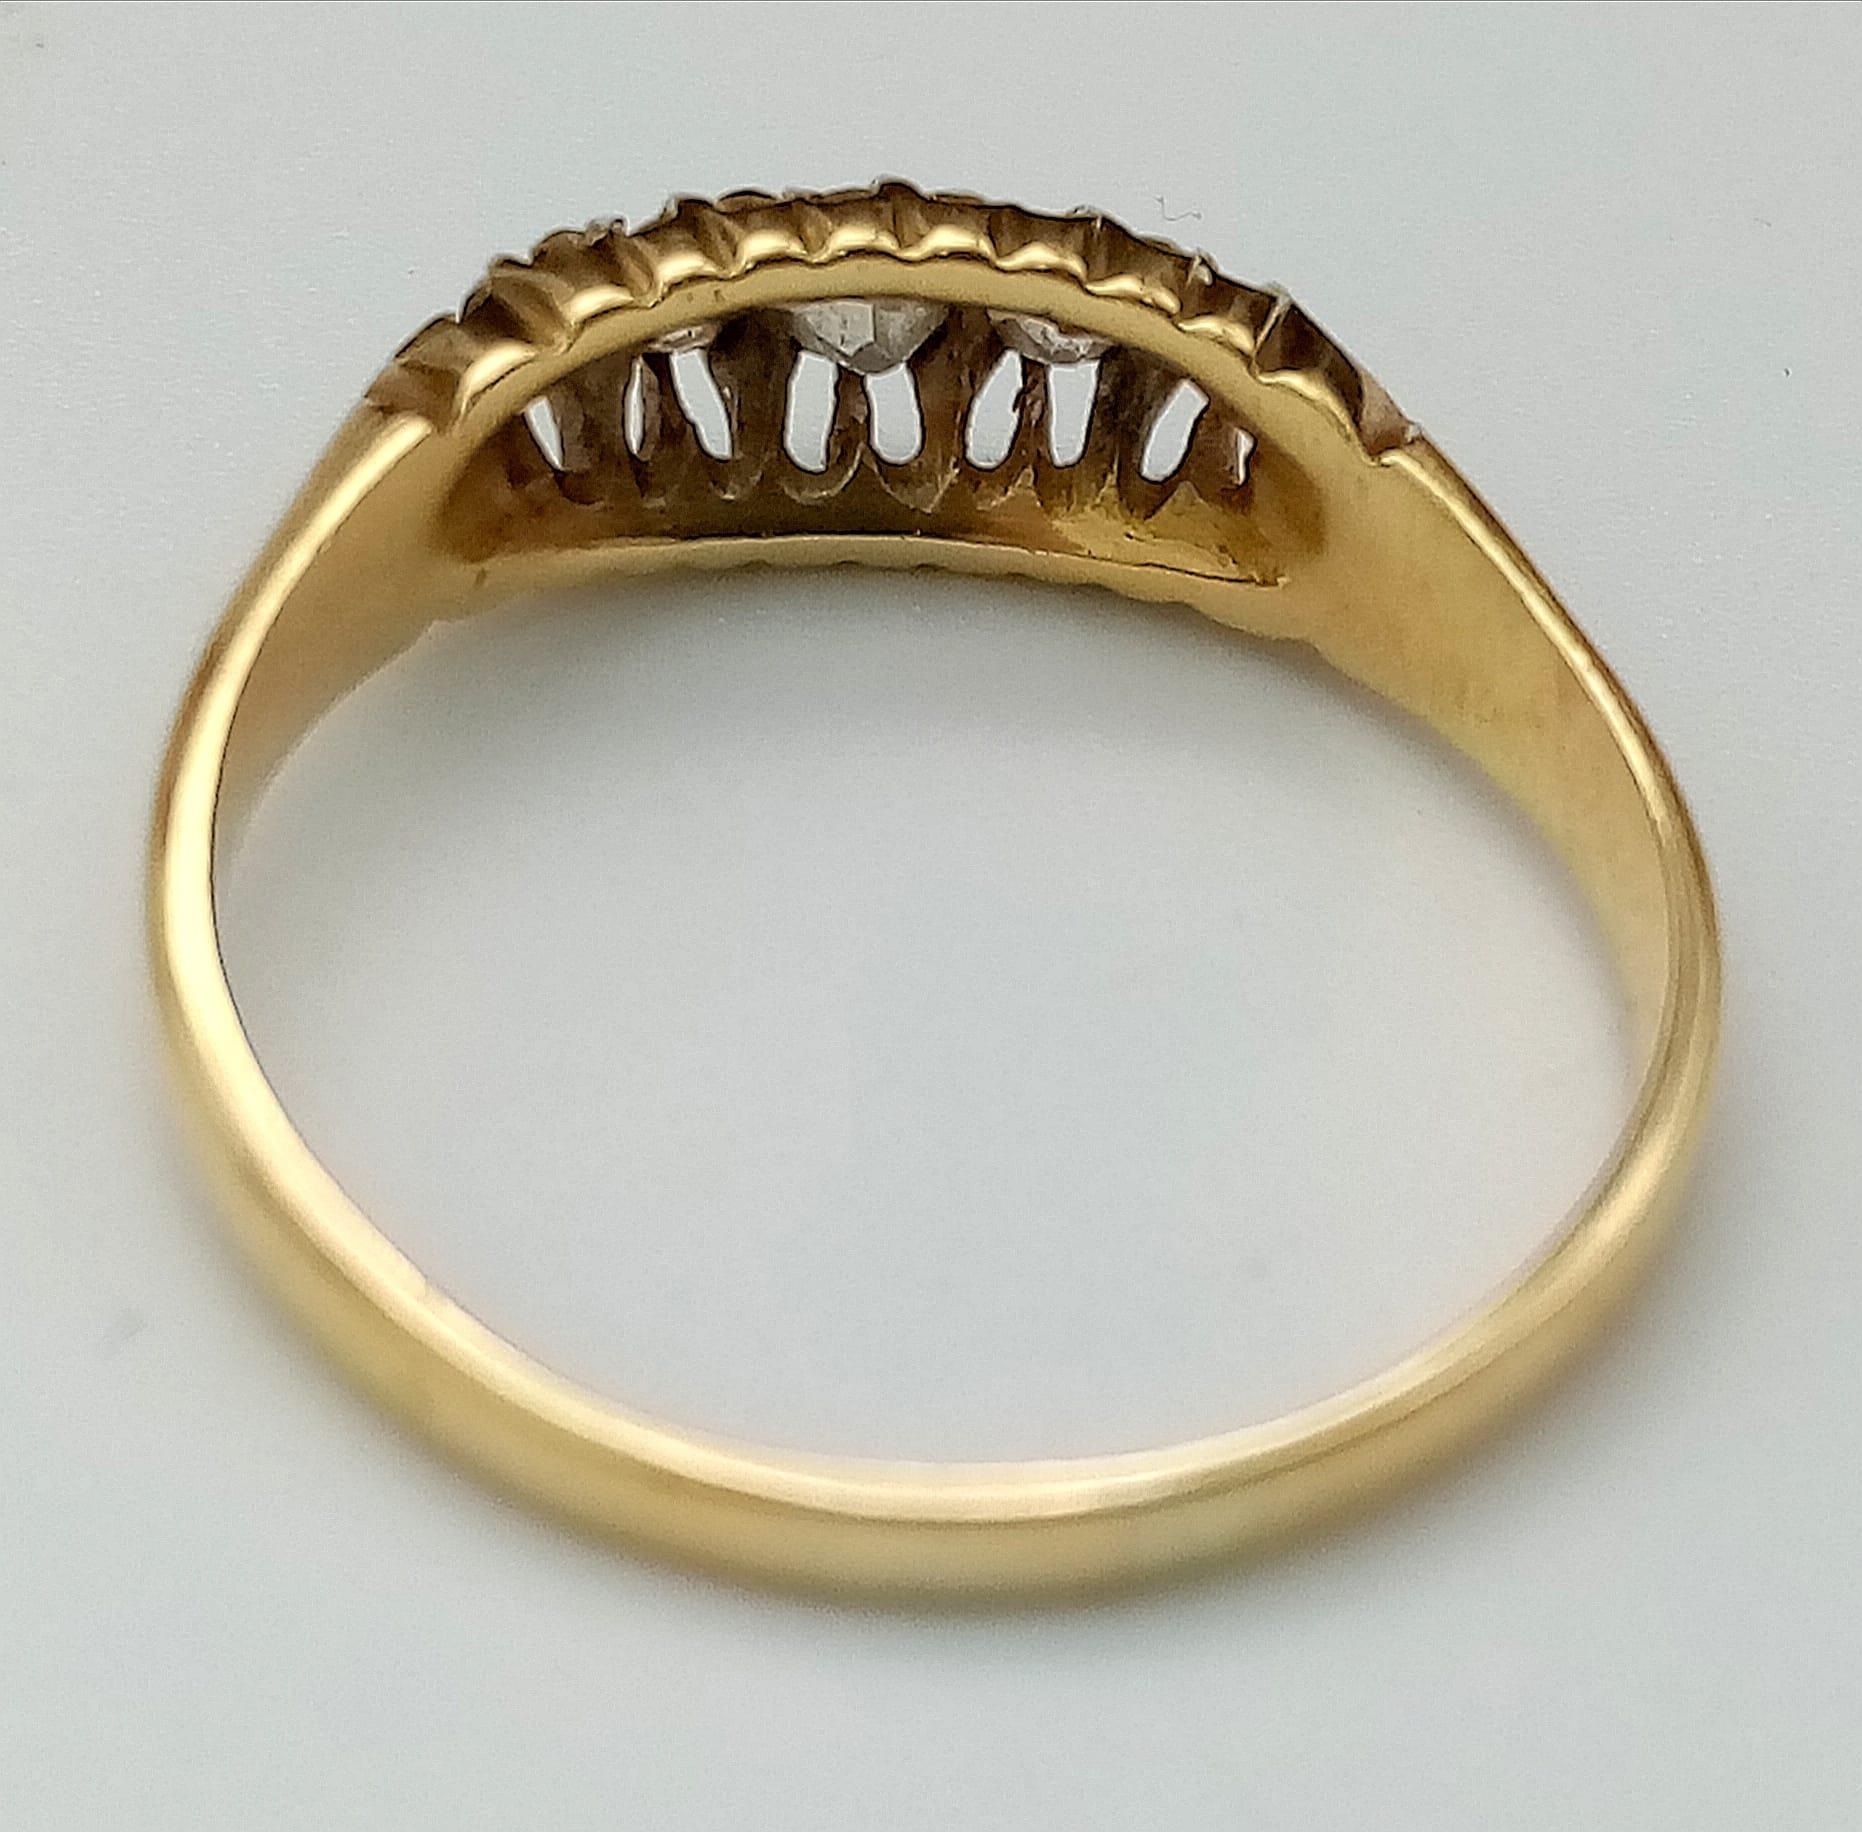 A VINTAGE 18K YELLOW GOLD, 5 STONE OLD CUT DIAMOND RING. Size R, 0.40ctw, 3.3g total weight. - Image 4 of 5